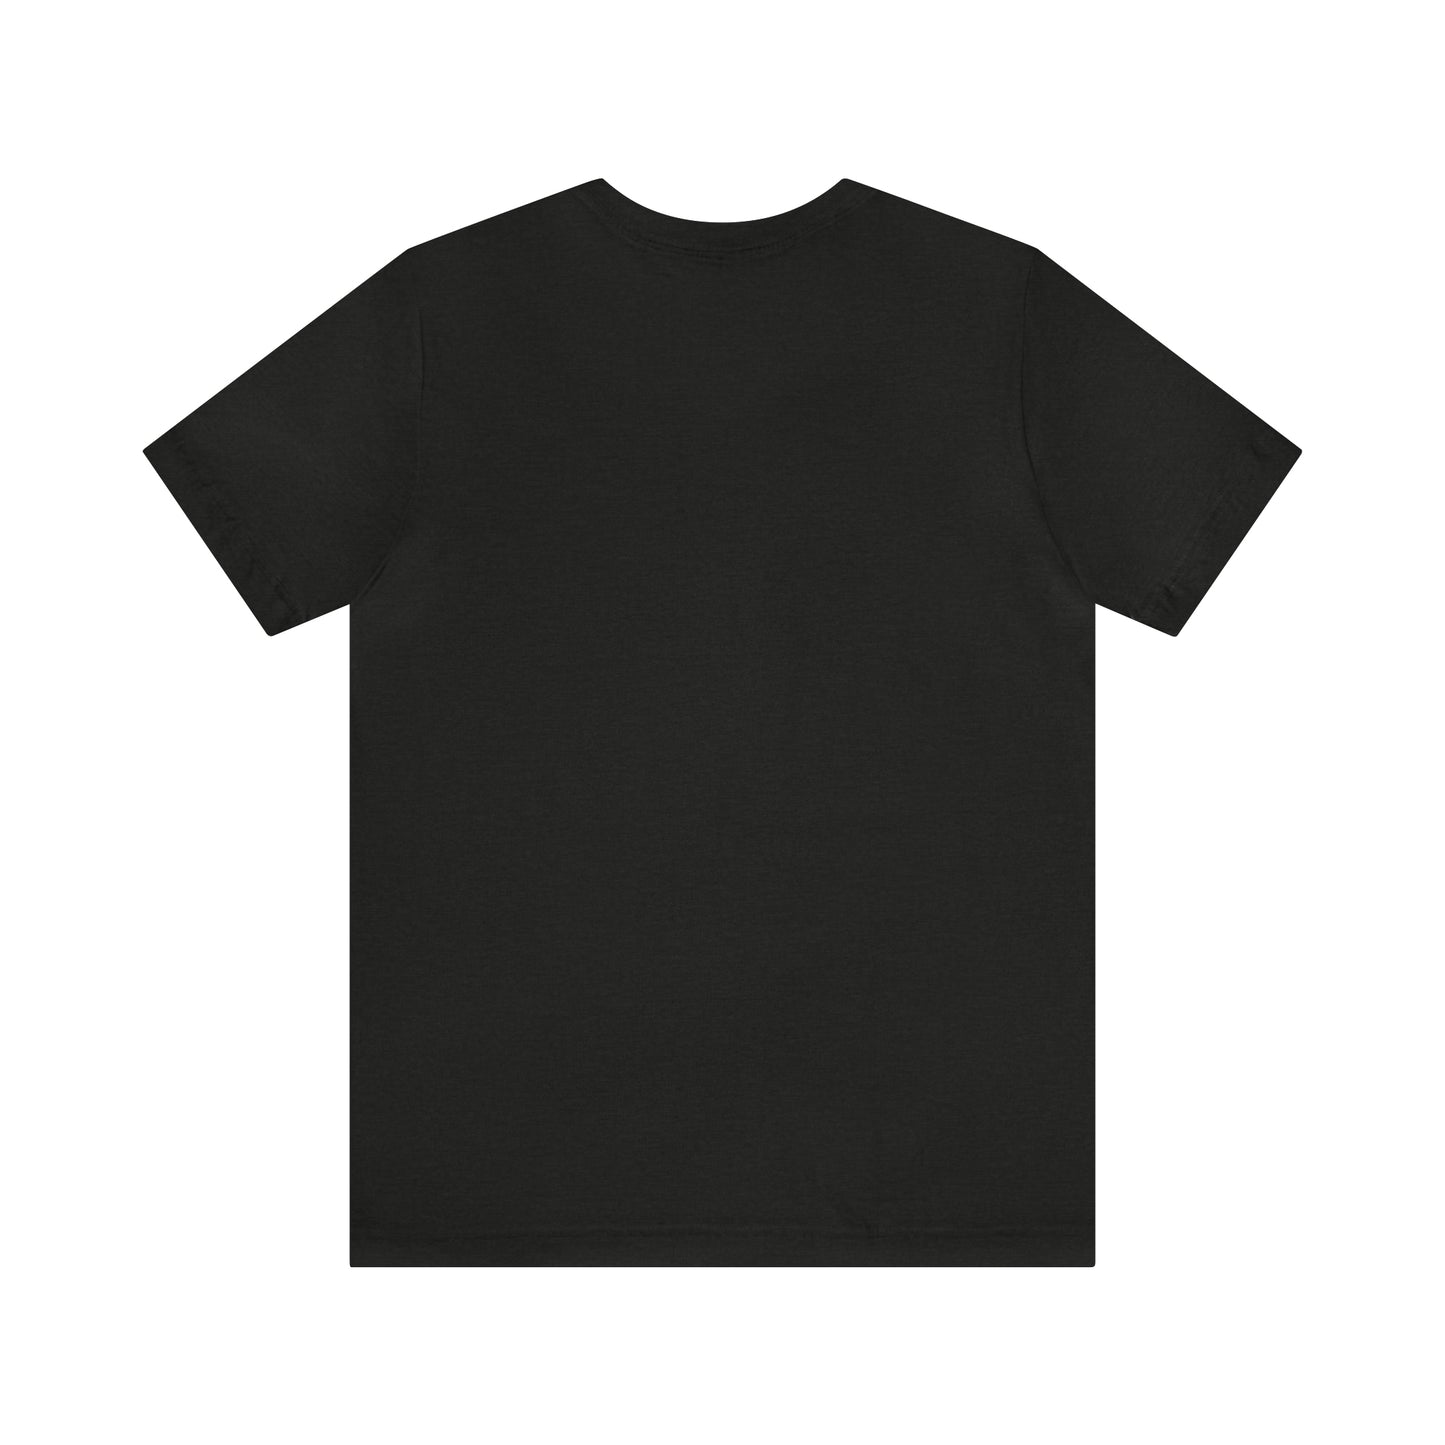 ABSTRACT SHAPES 101 - Unisex Jersey Short Sleeve Tee